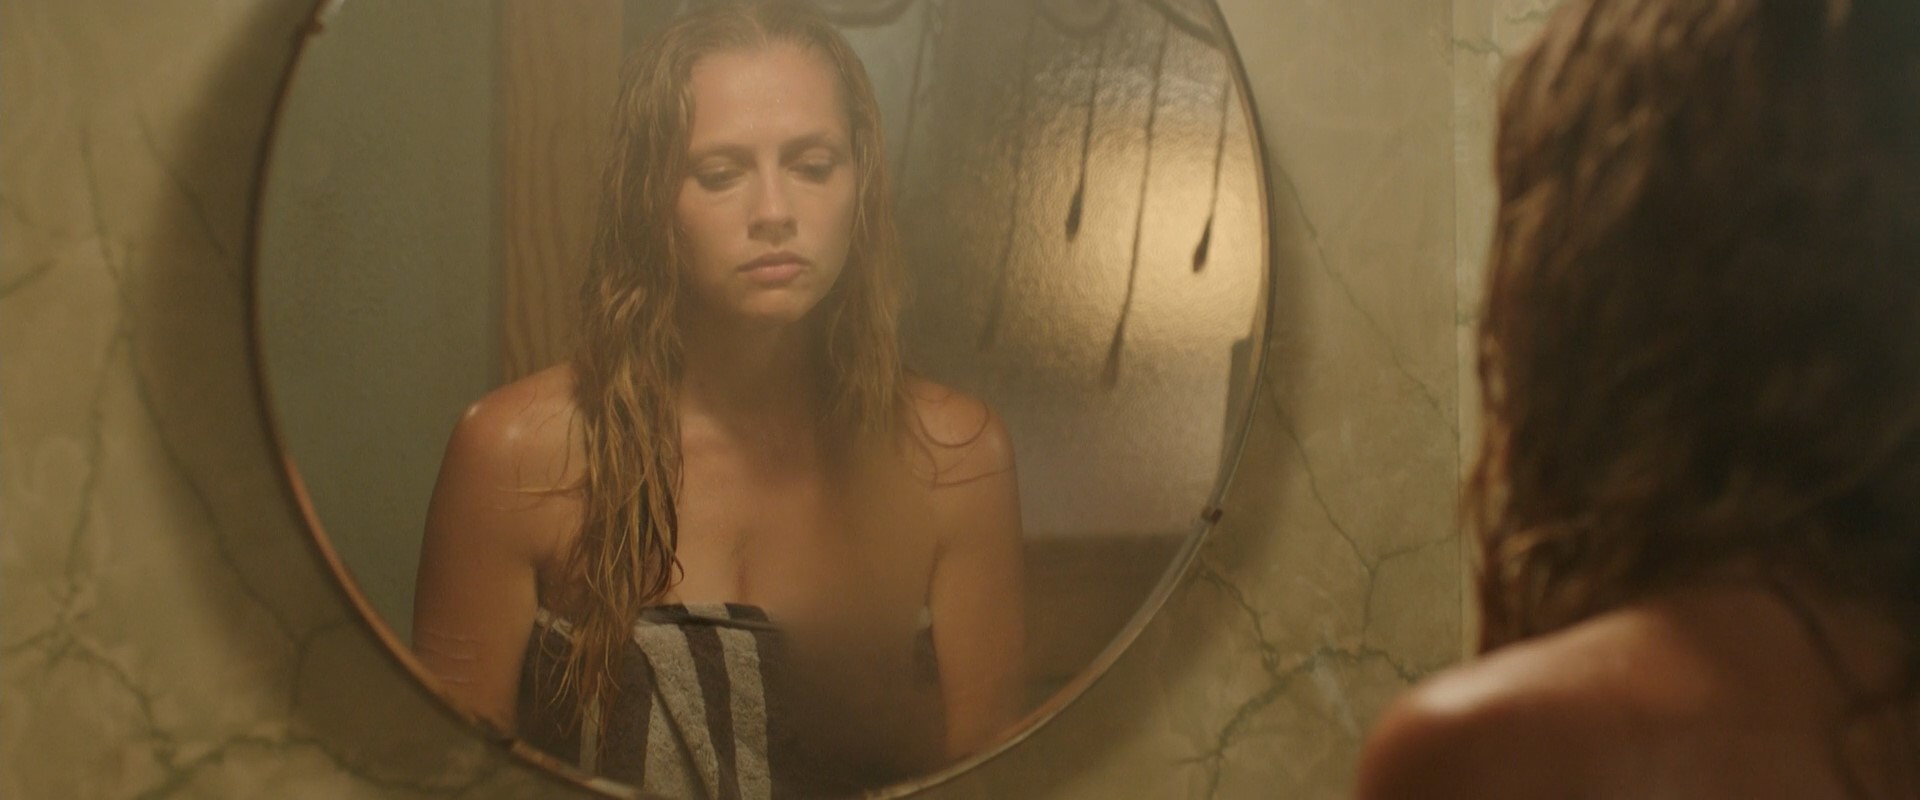 Nude Video Celebs Teresa Palmer Sexy Lights Out 2016